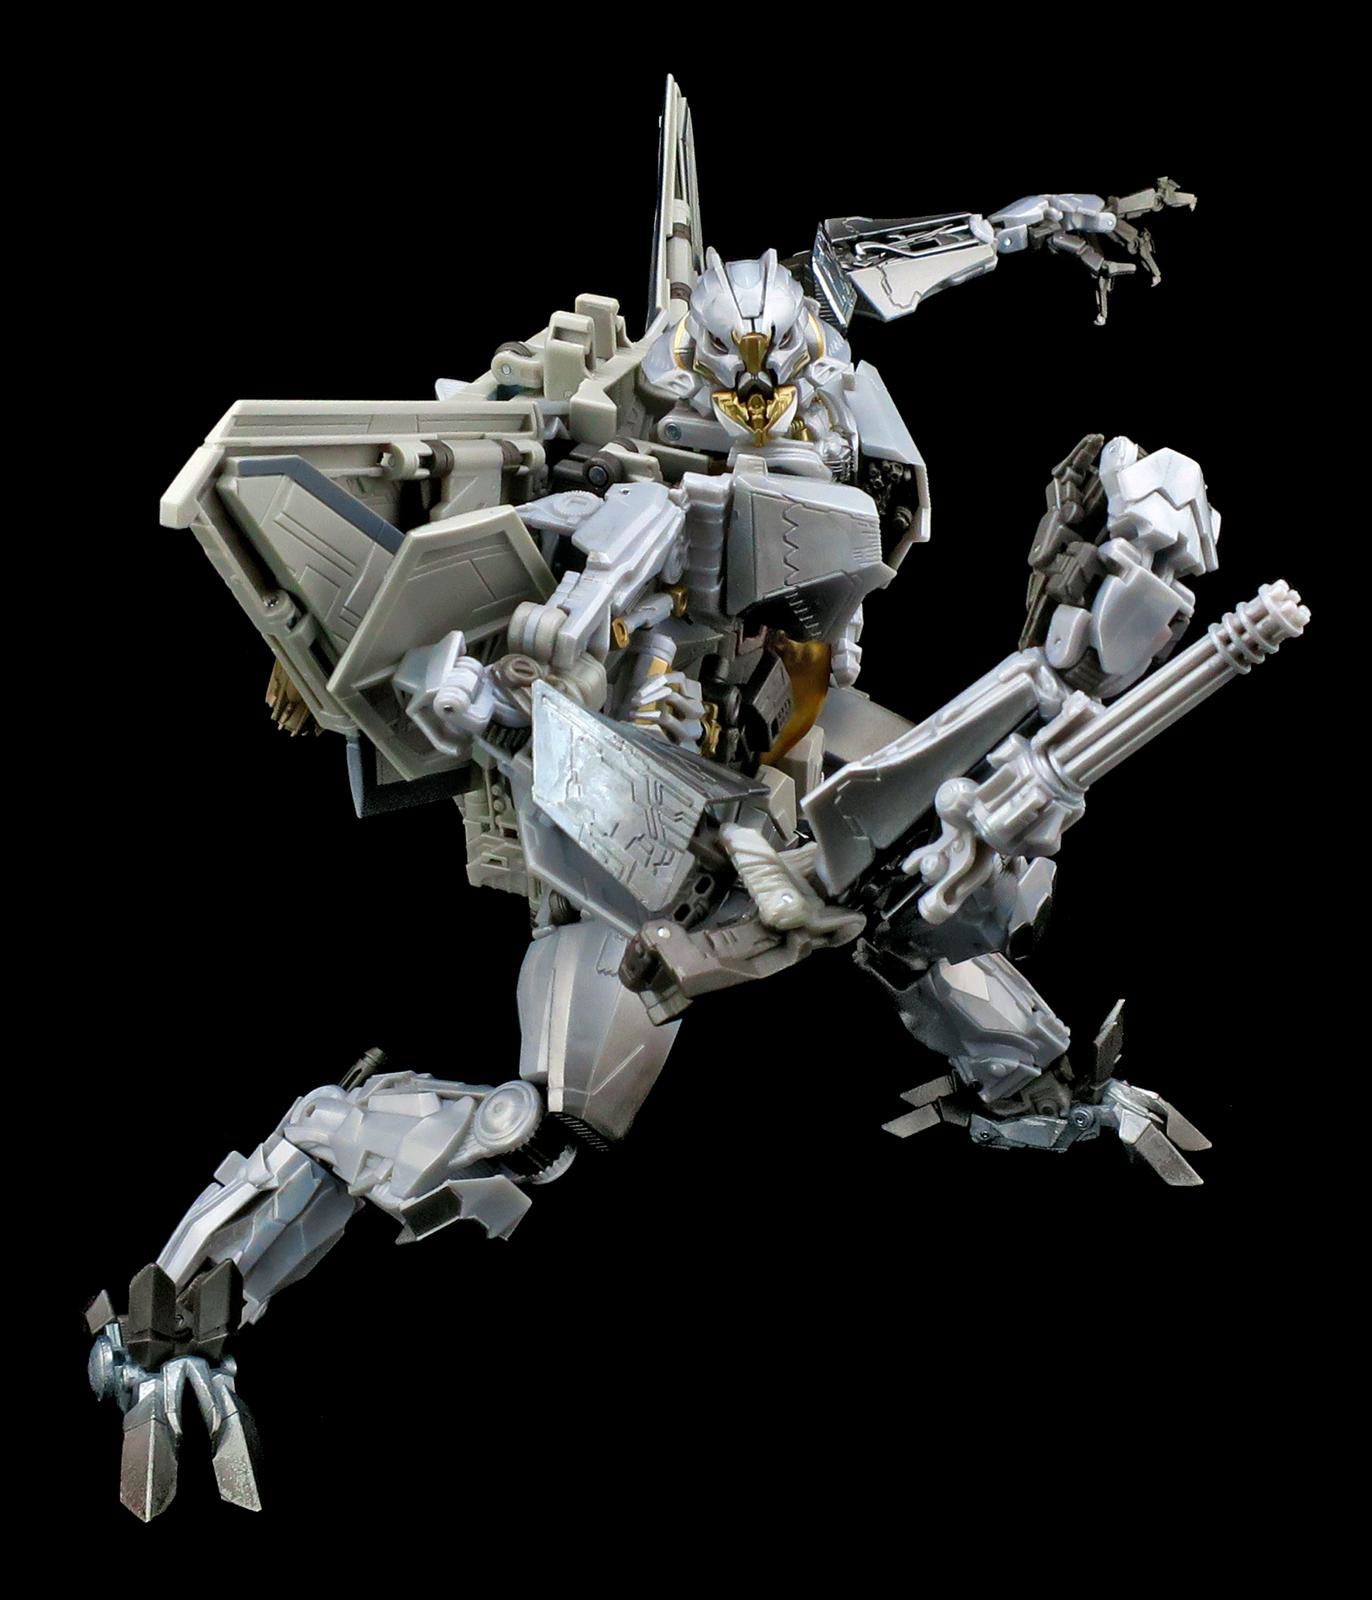 Transformers News: More images and official description of Masterpiece MPM-10 Starscream